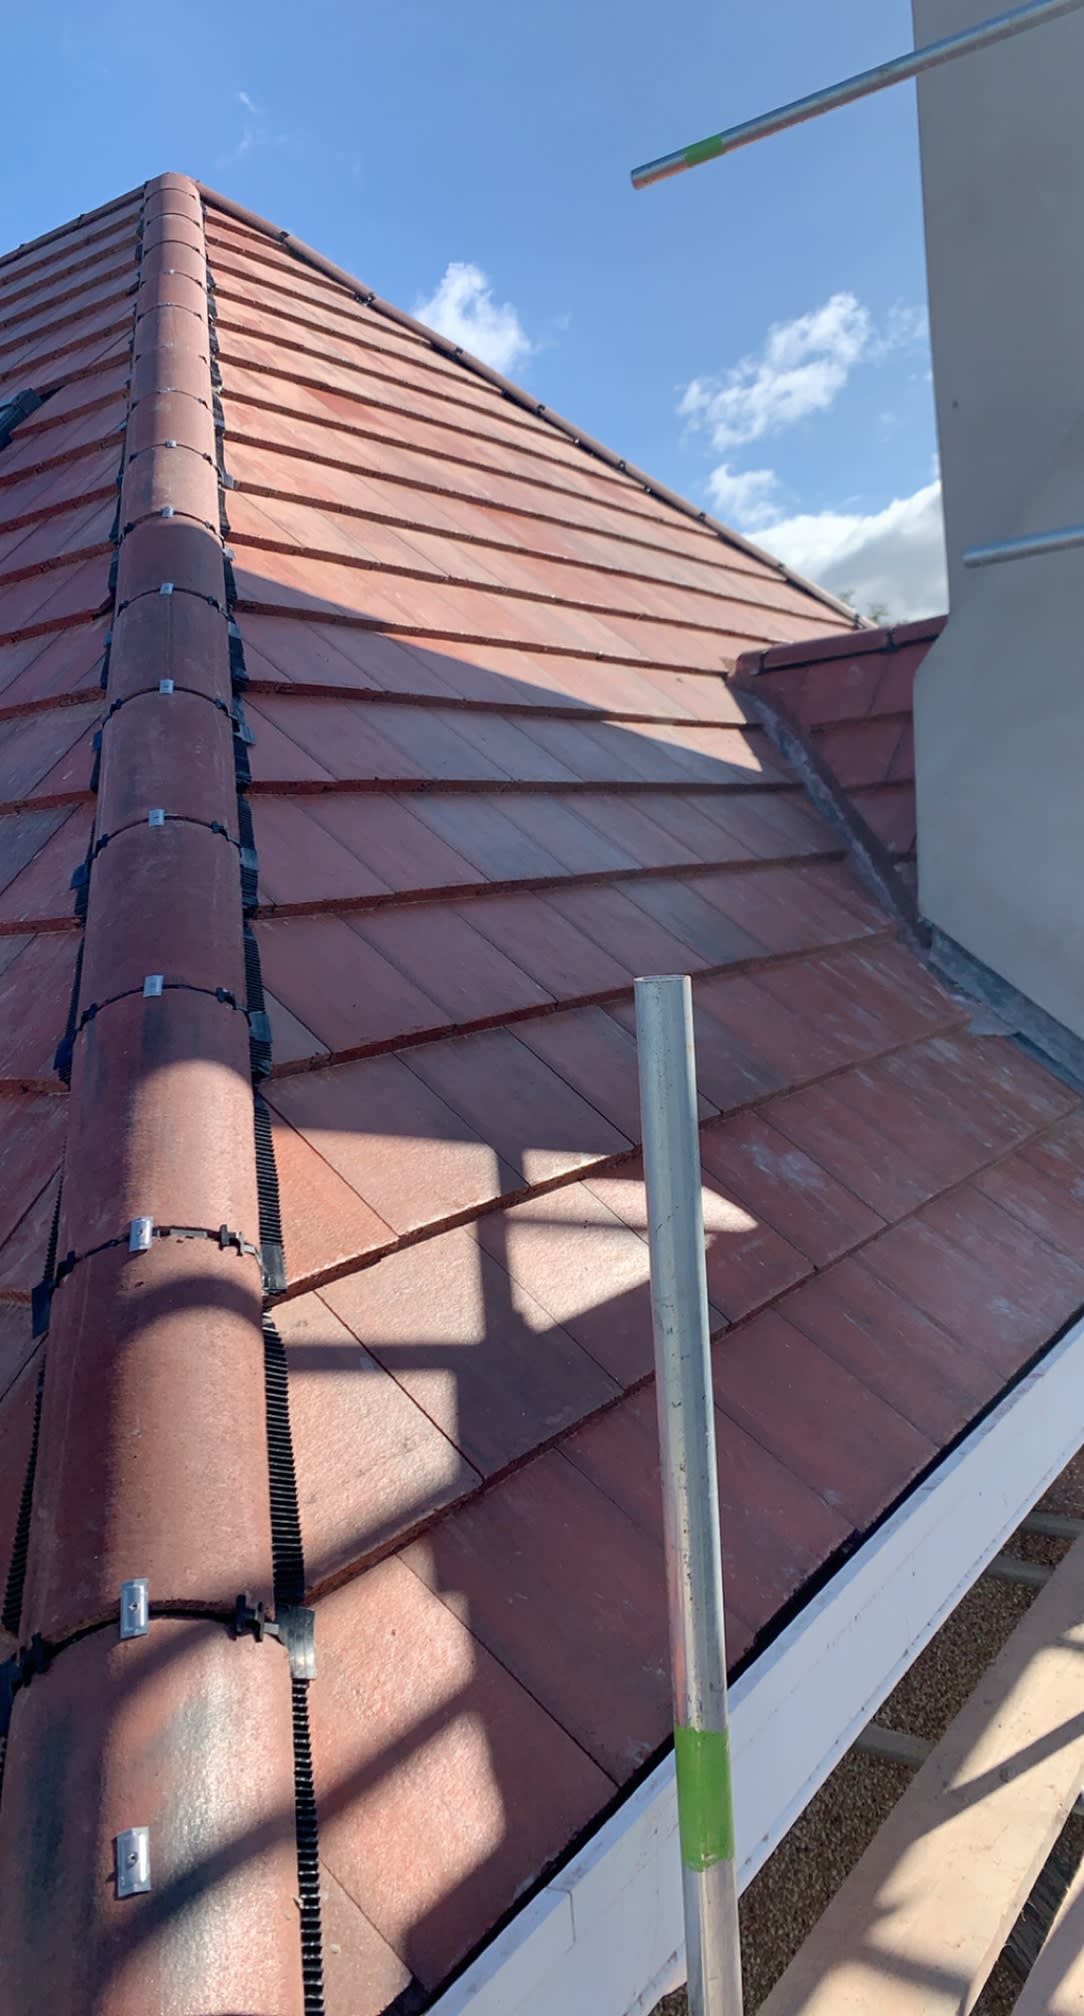 Images North Wales Roofing Ltd